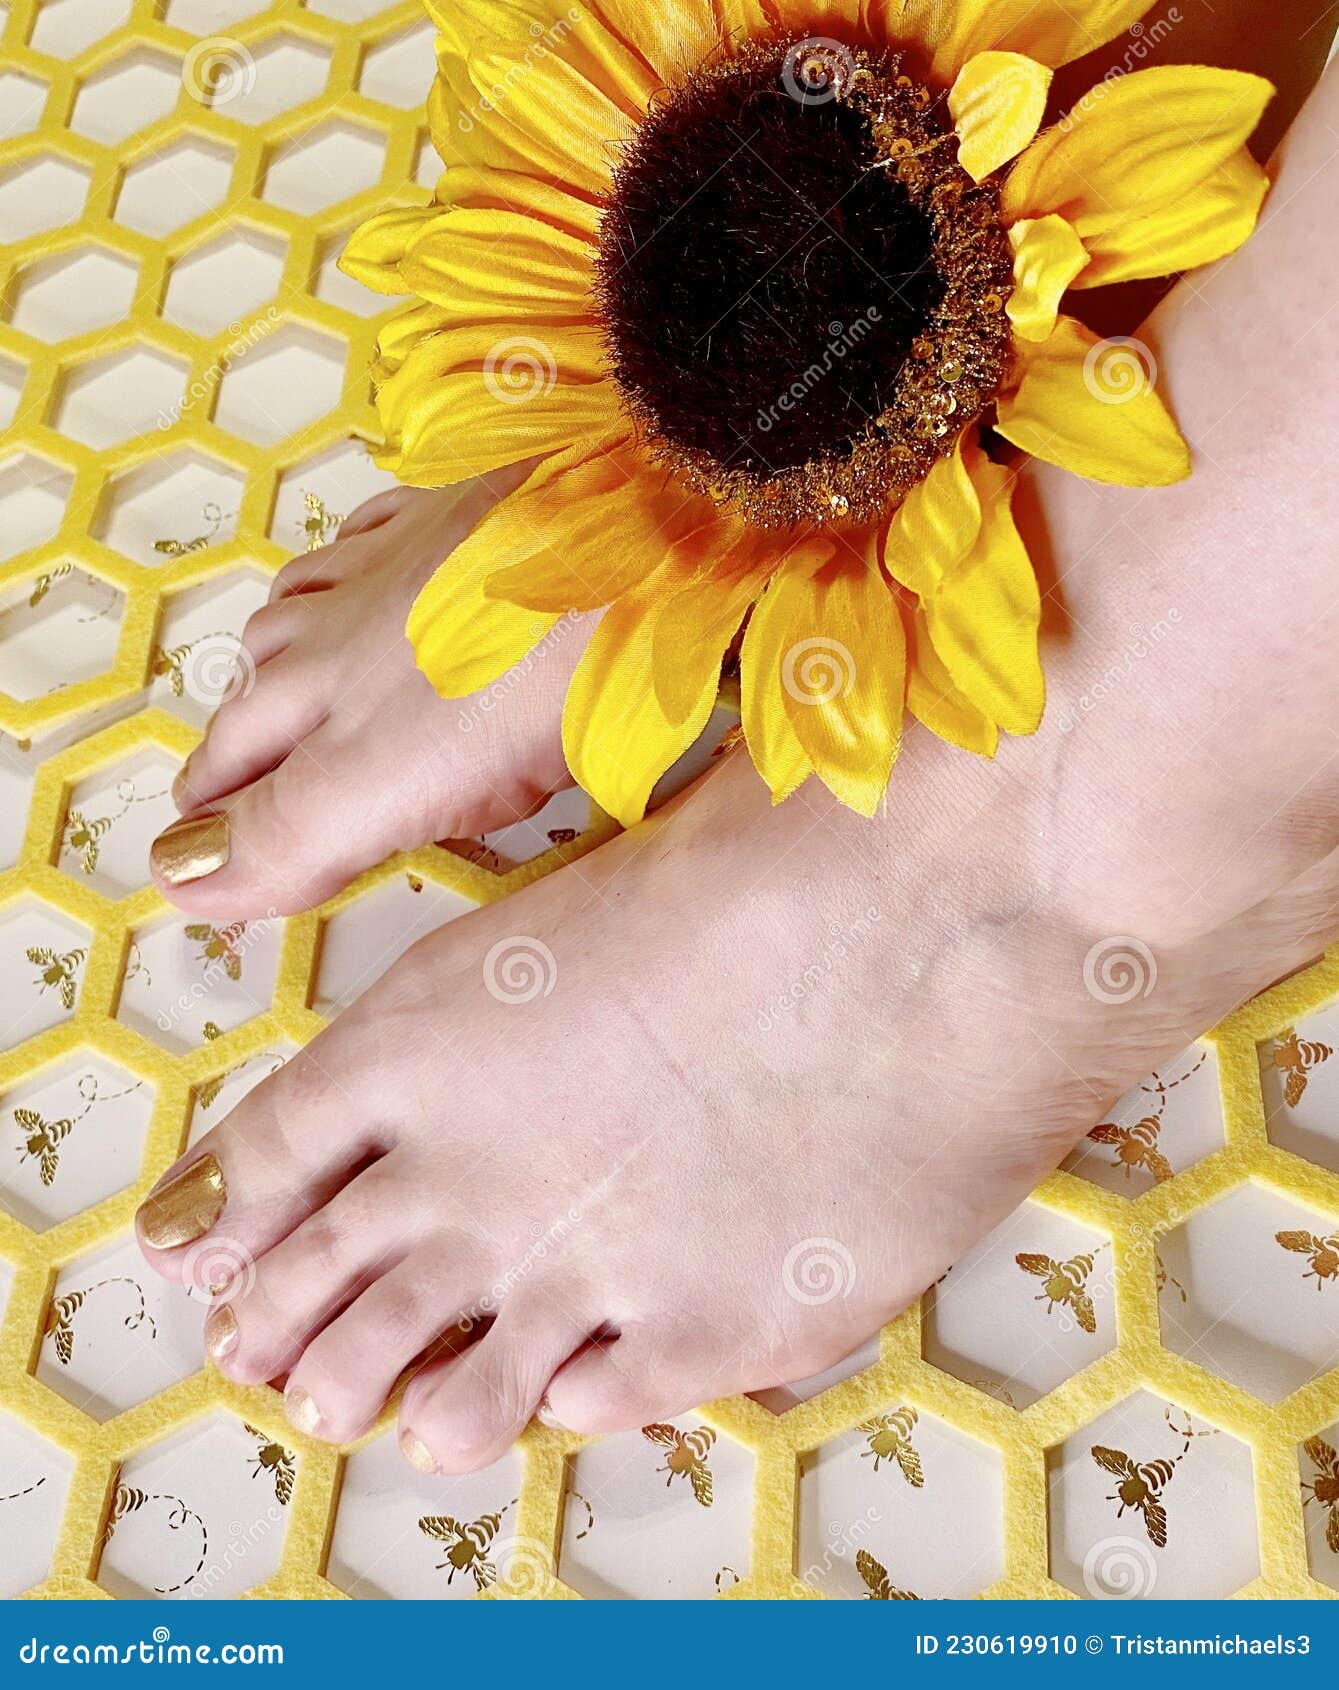 The Nail Art Show: The Flowers of the Sun